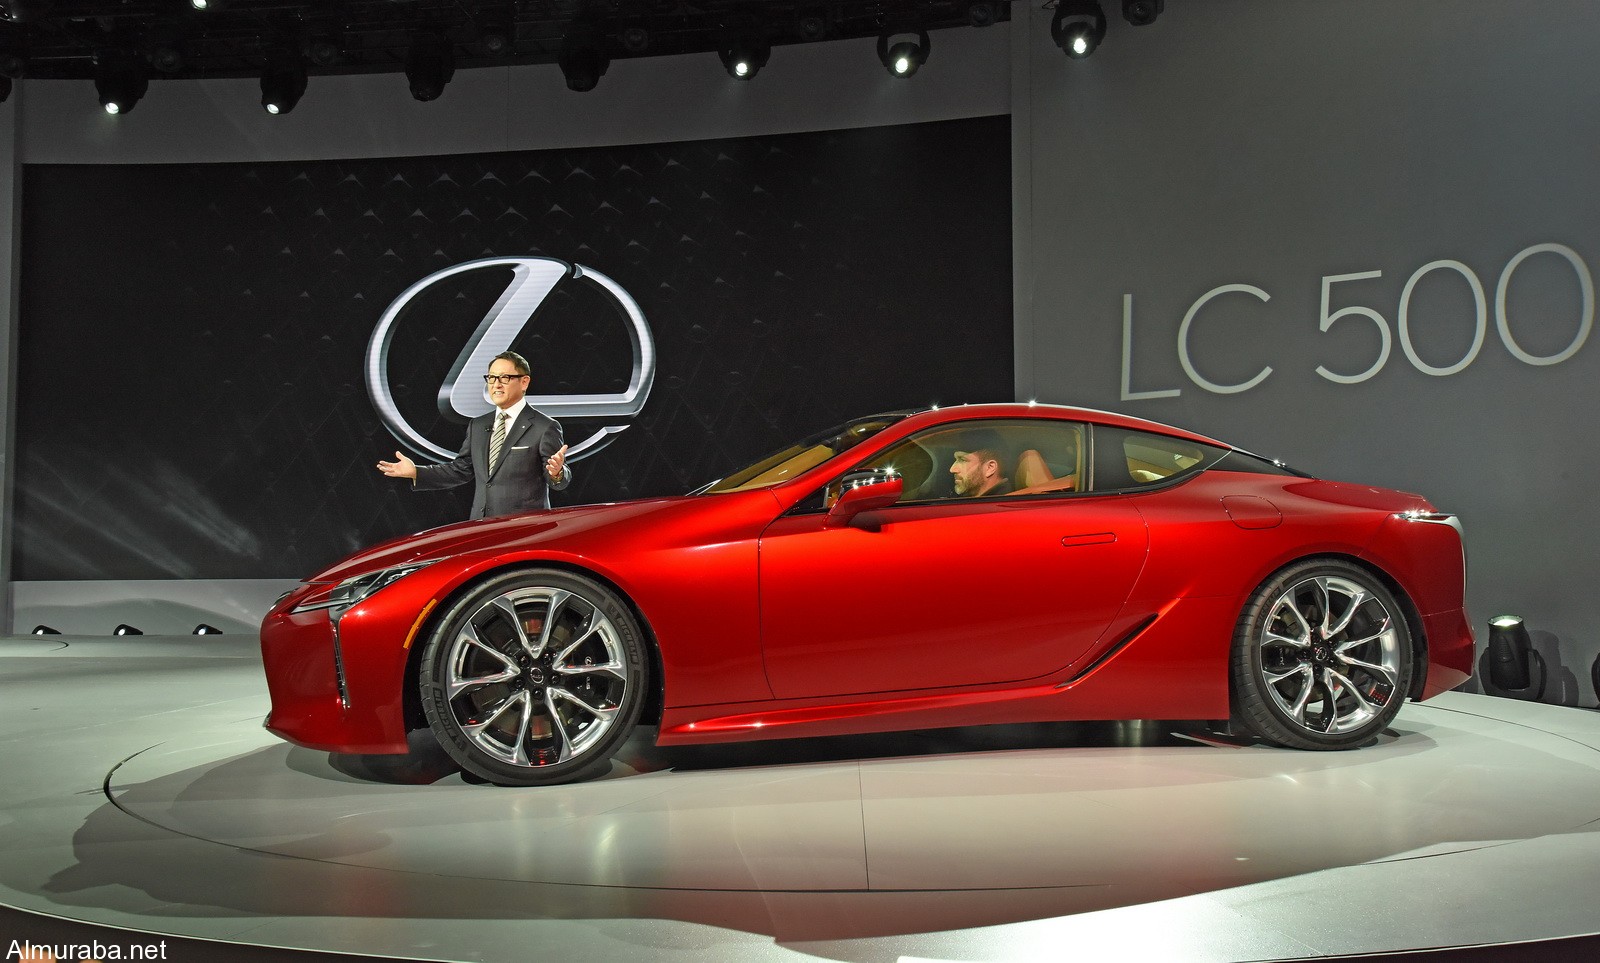 Detroit – January 11, 2016 – Akio Toyoda, Toyota Motor Corporation President and Lexus Chief Branding Officer unveiled the all-new Lexus LC 500 luxury sports car at the North American International Auto Show.  Lexus LC 500 features a 467 hp., V-8 engine, a 10-speed automatic transmission and amazing driving dynamics.  For more information contact Maurice Durand at 714-889-9908.